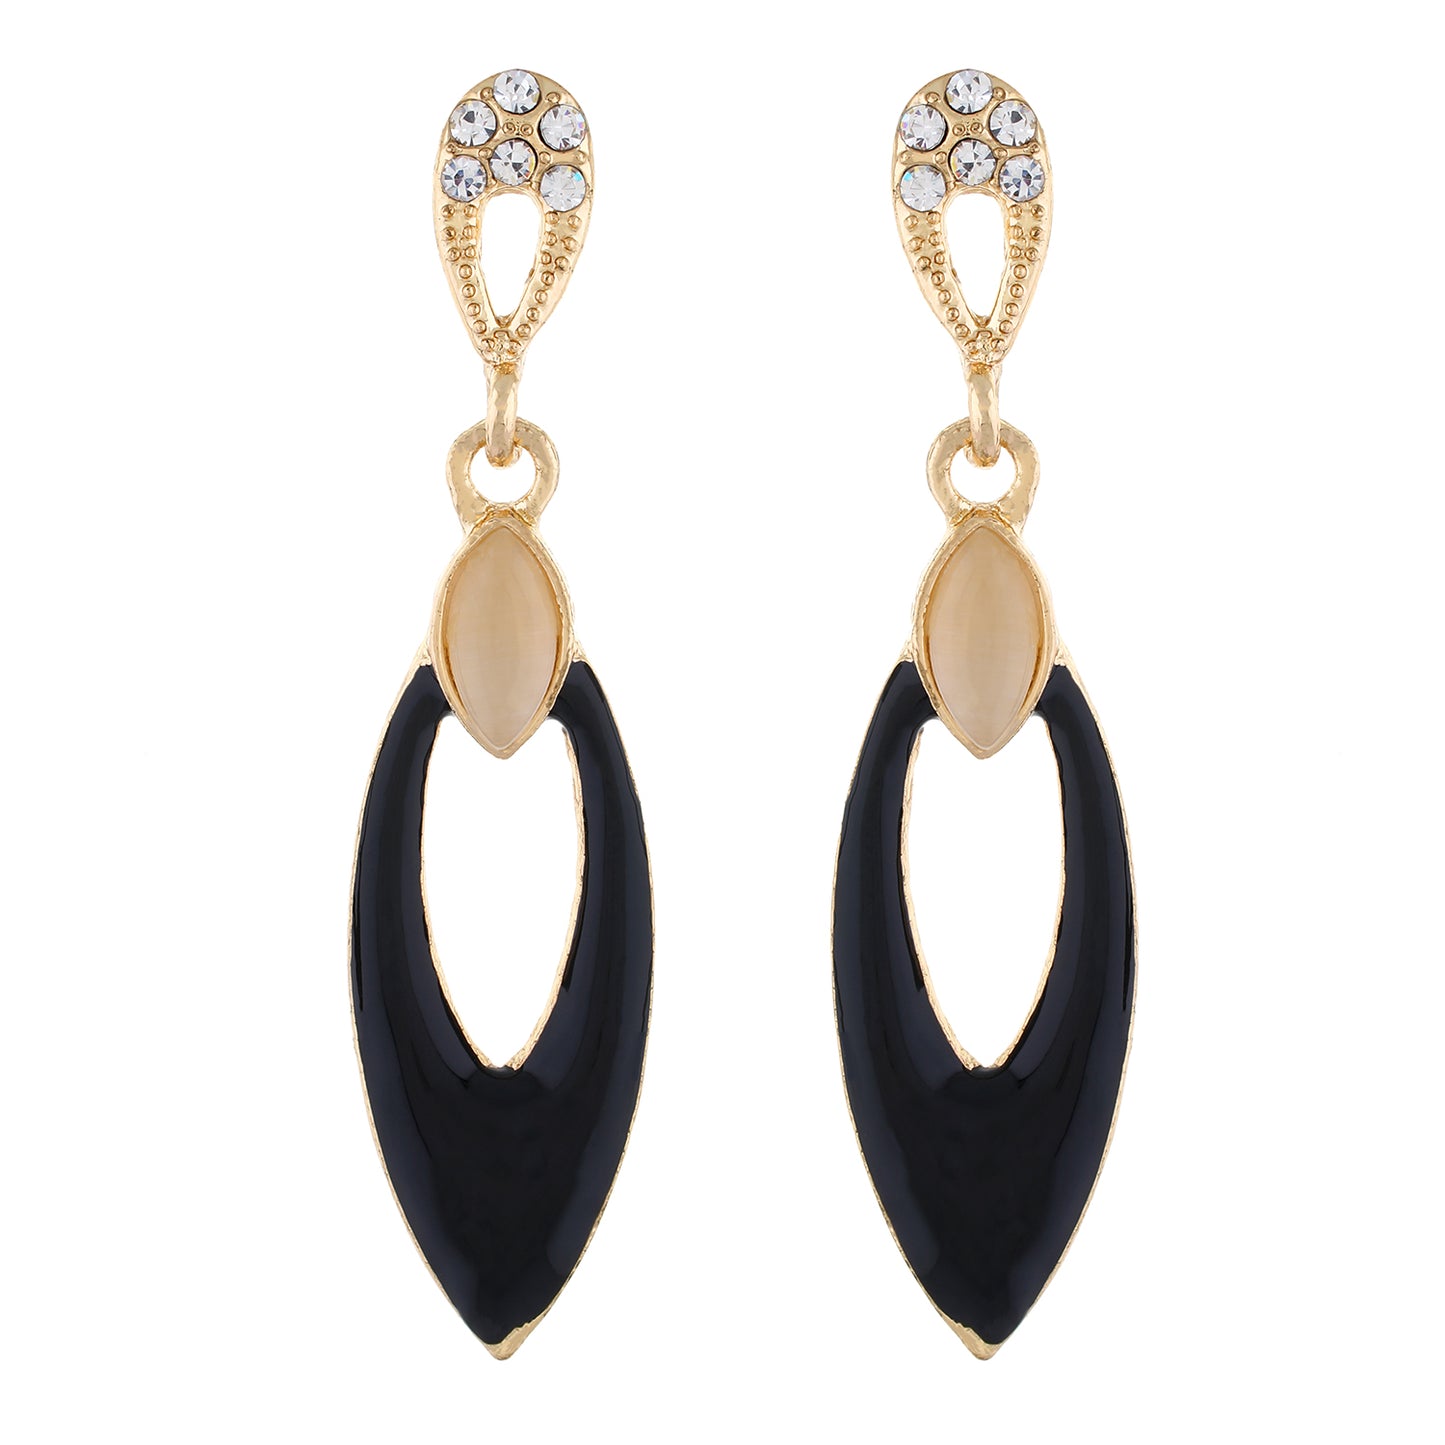 Black colour Oval Design Hanging Earrings for Girls and Women